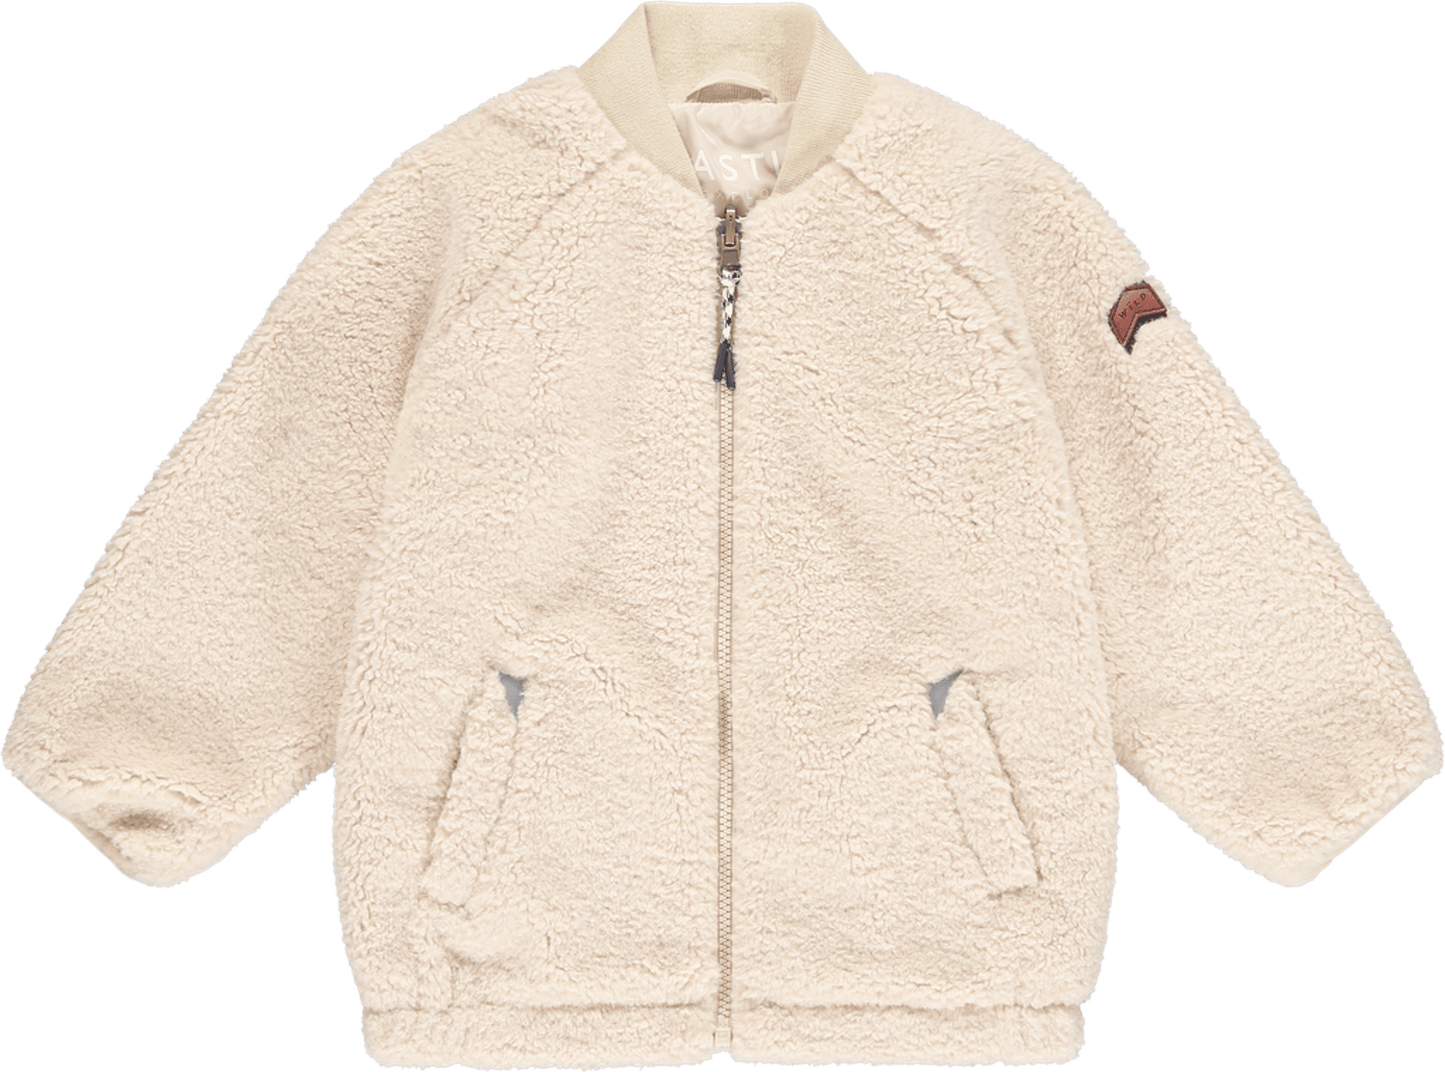 WILD 3in1 All-Season Jacket | ANTIQUE OLIVE